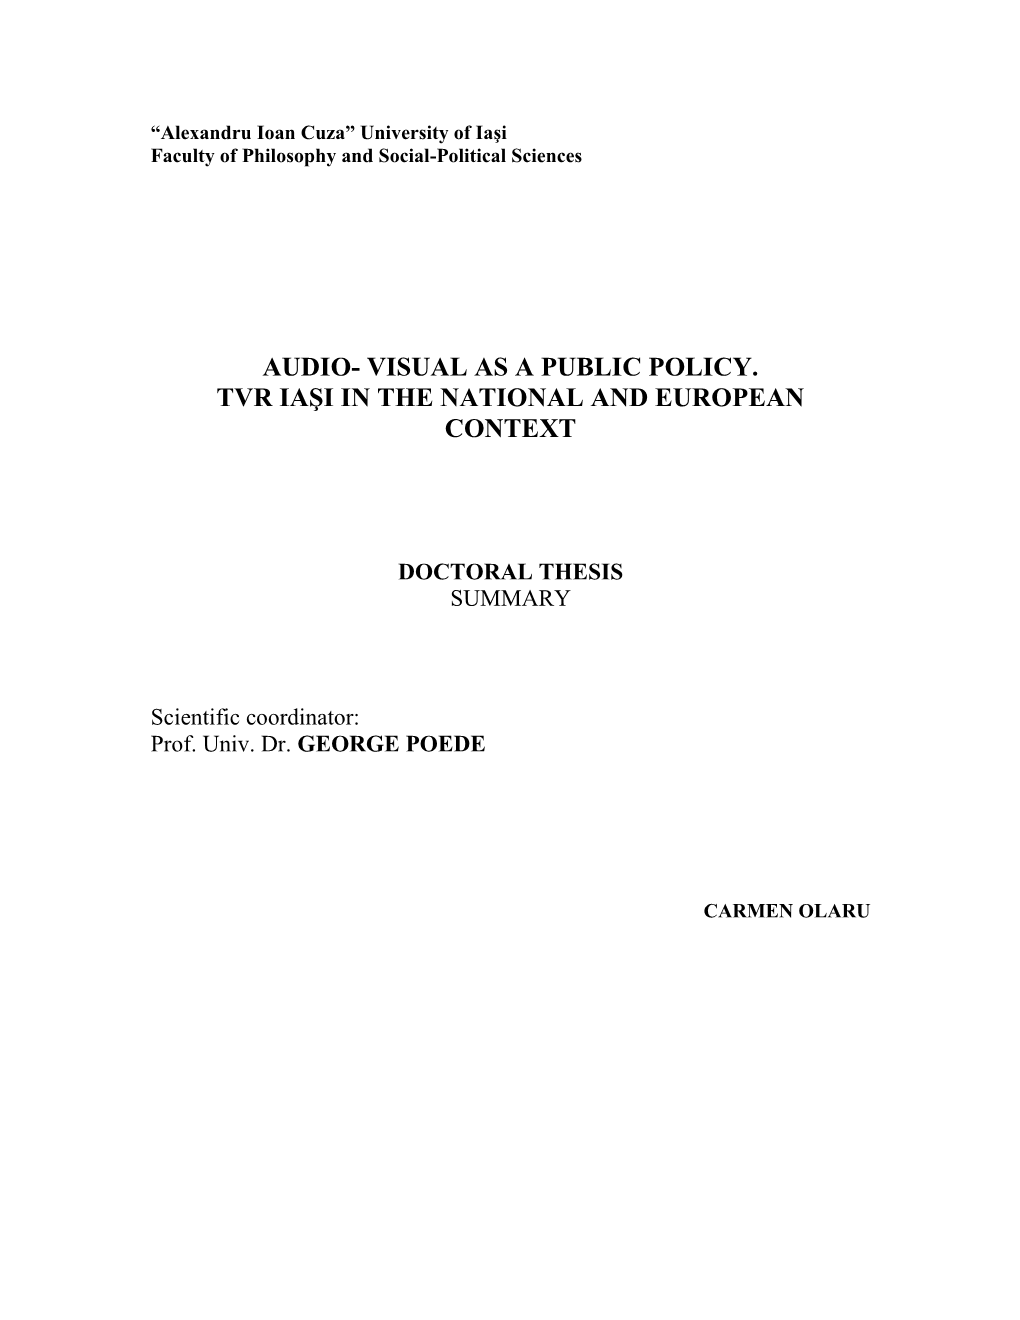 Visual As a Public Policy. Tvr Iaşi in the National and European Context